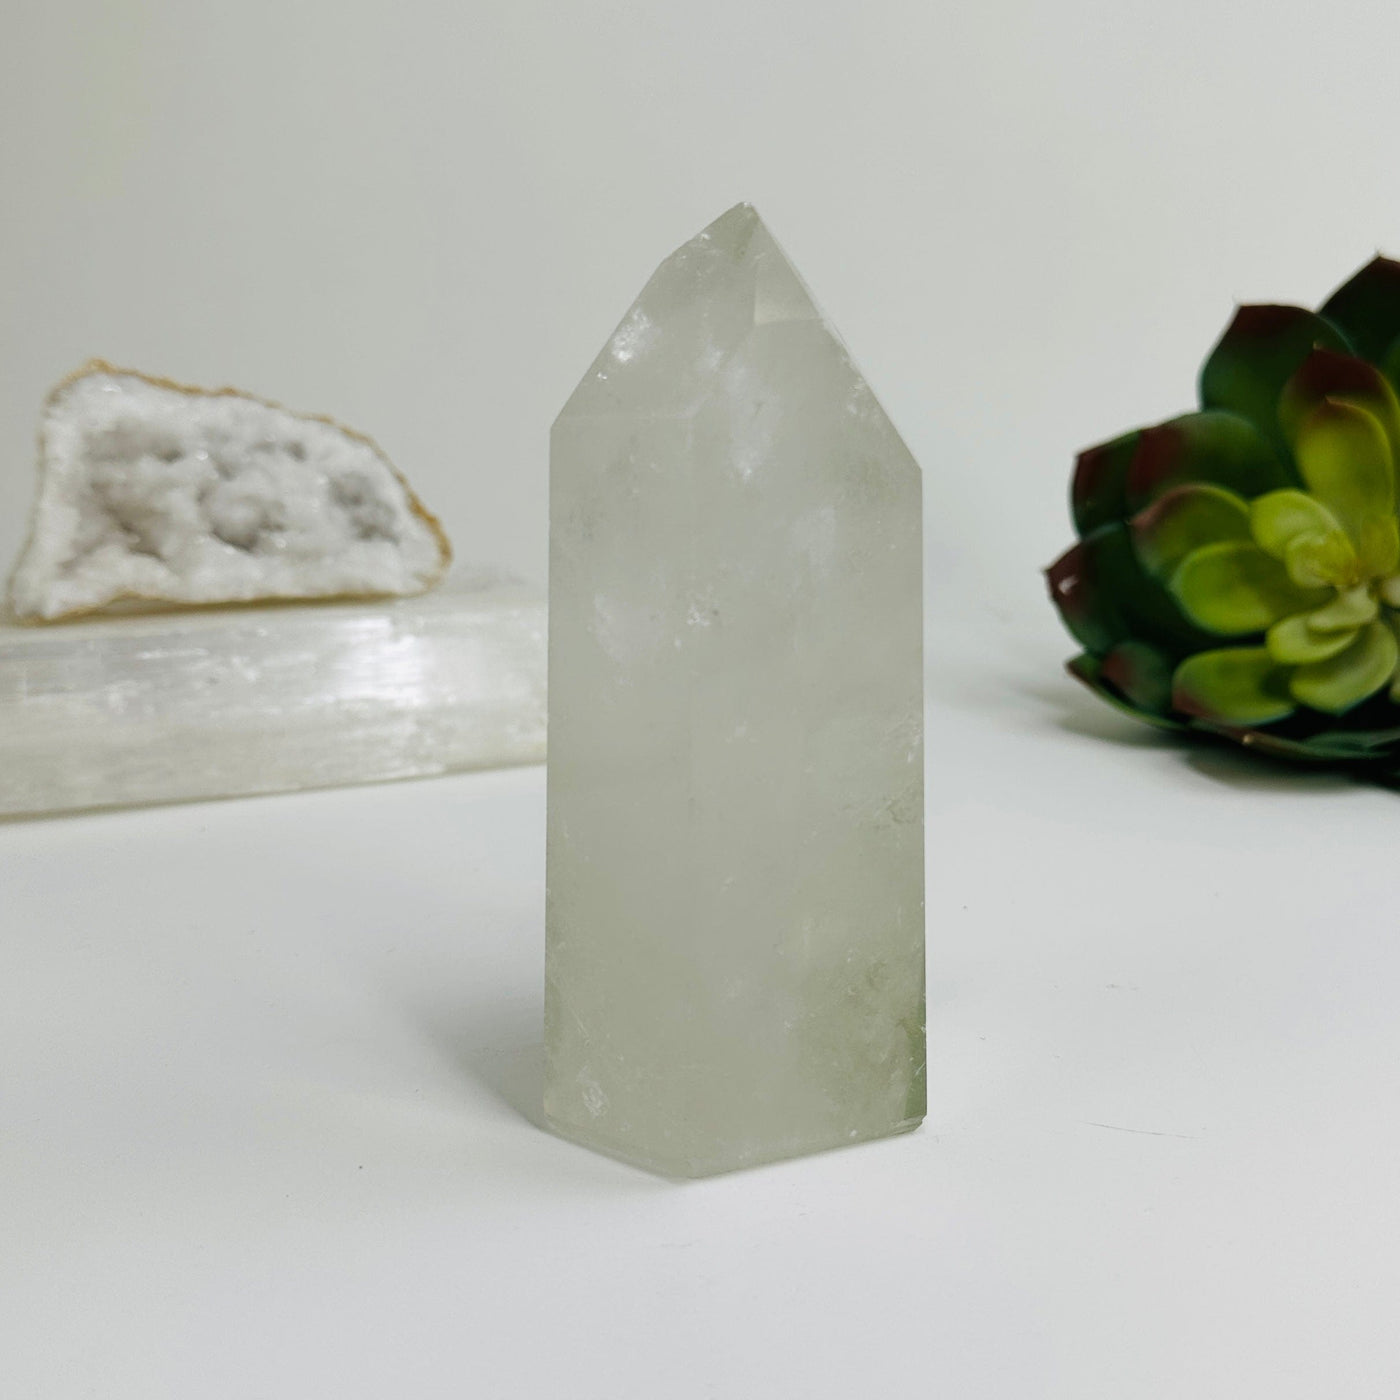 Crystal quartz polished point with decorations in the background